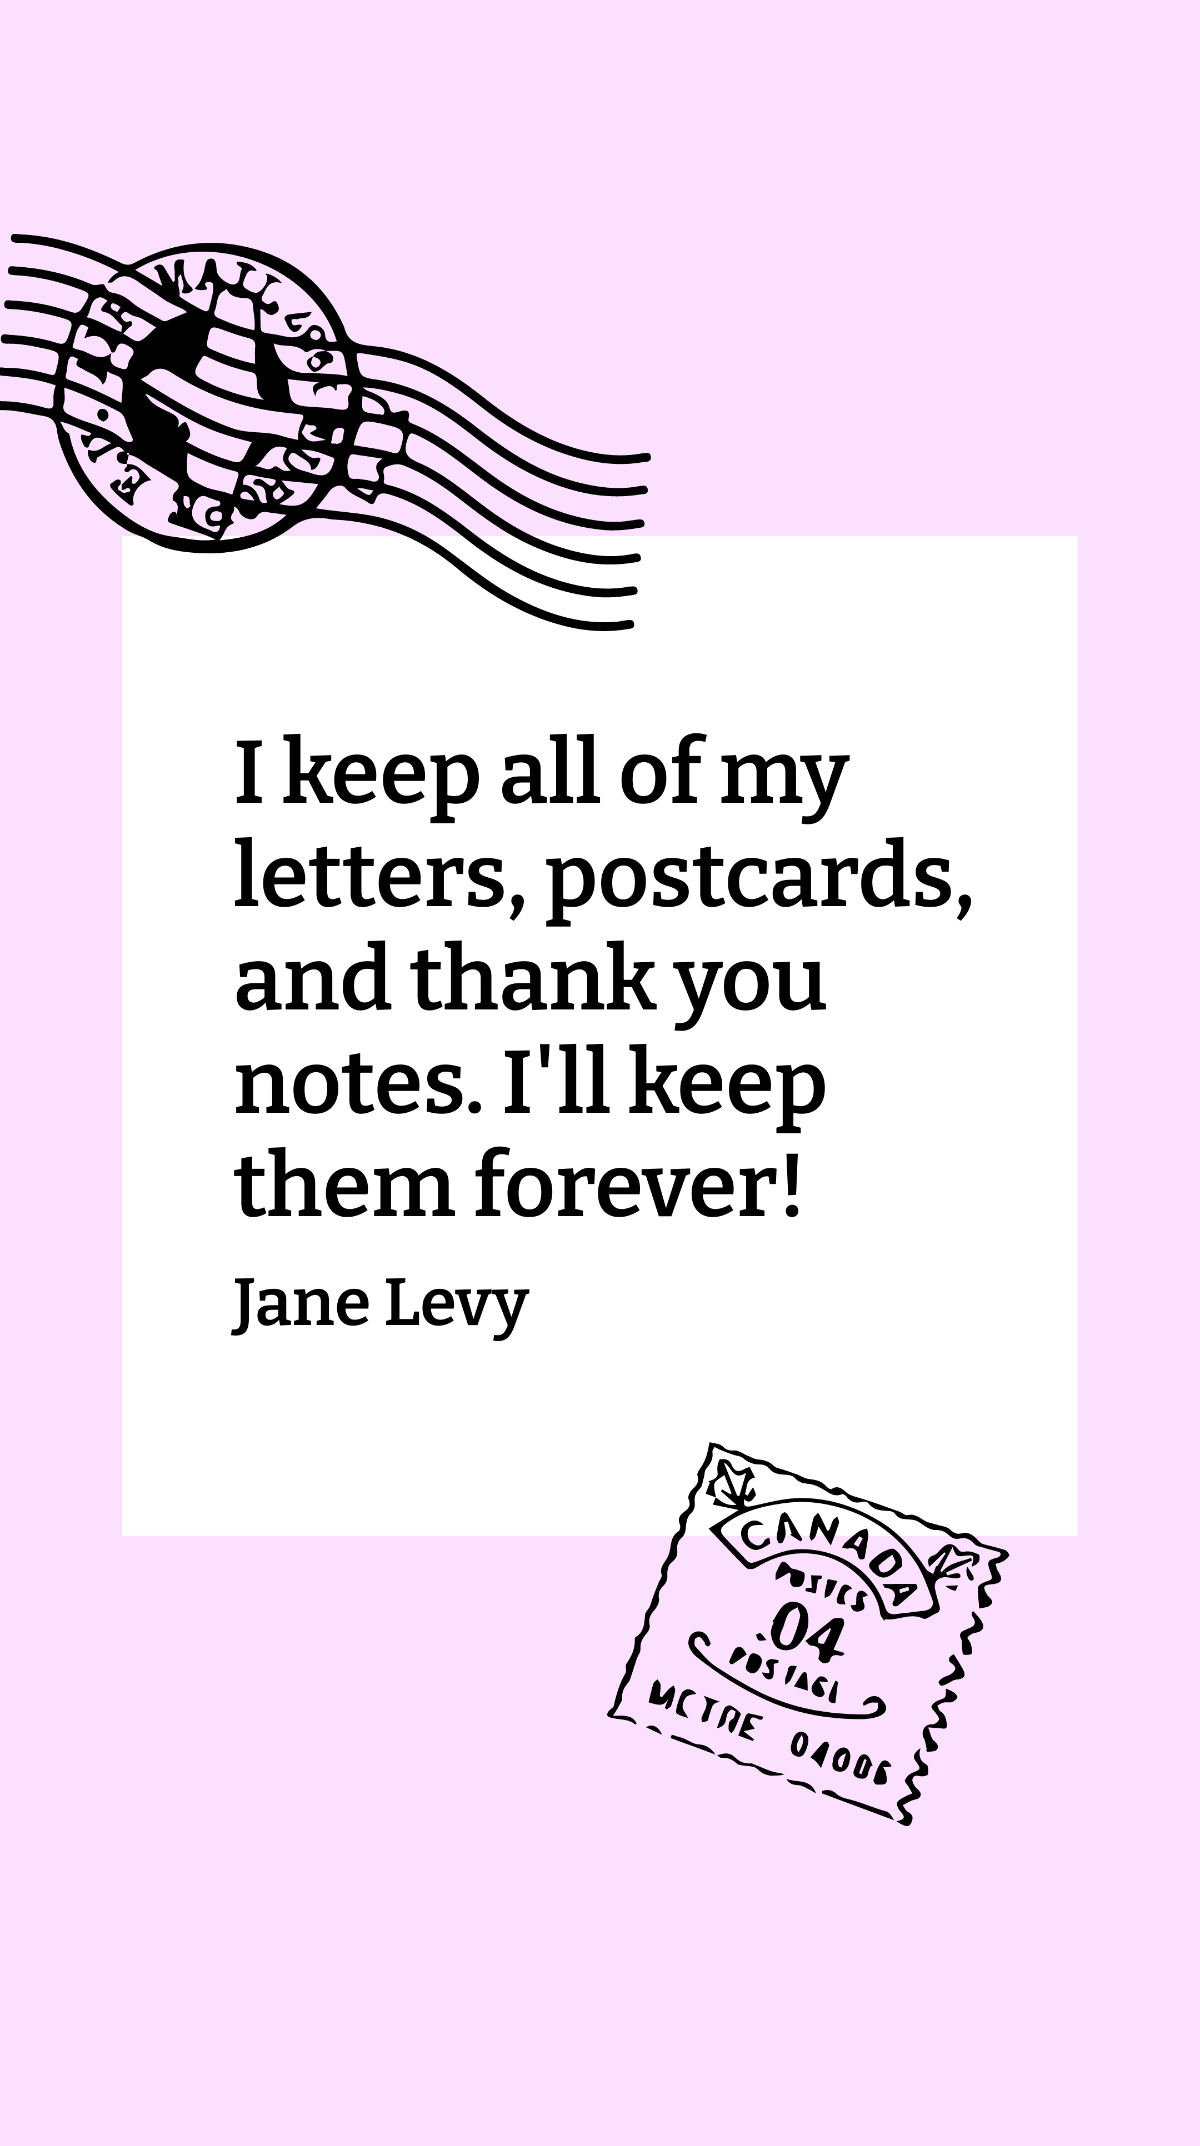 Jane Levy - I keep all of my letters, postcards, and thank you notes. I'll keep them forever! Template